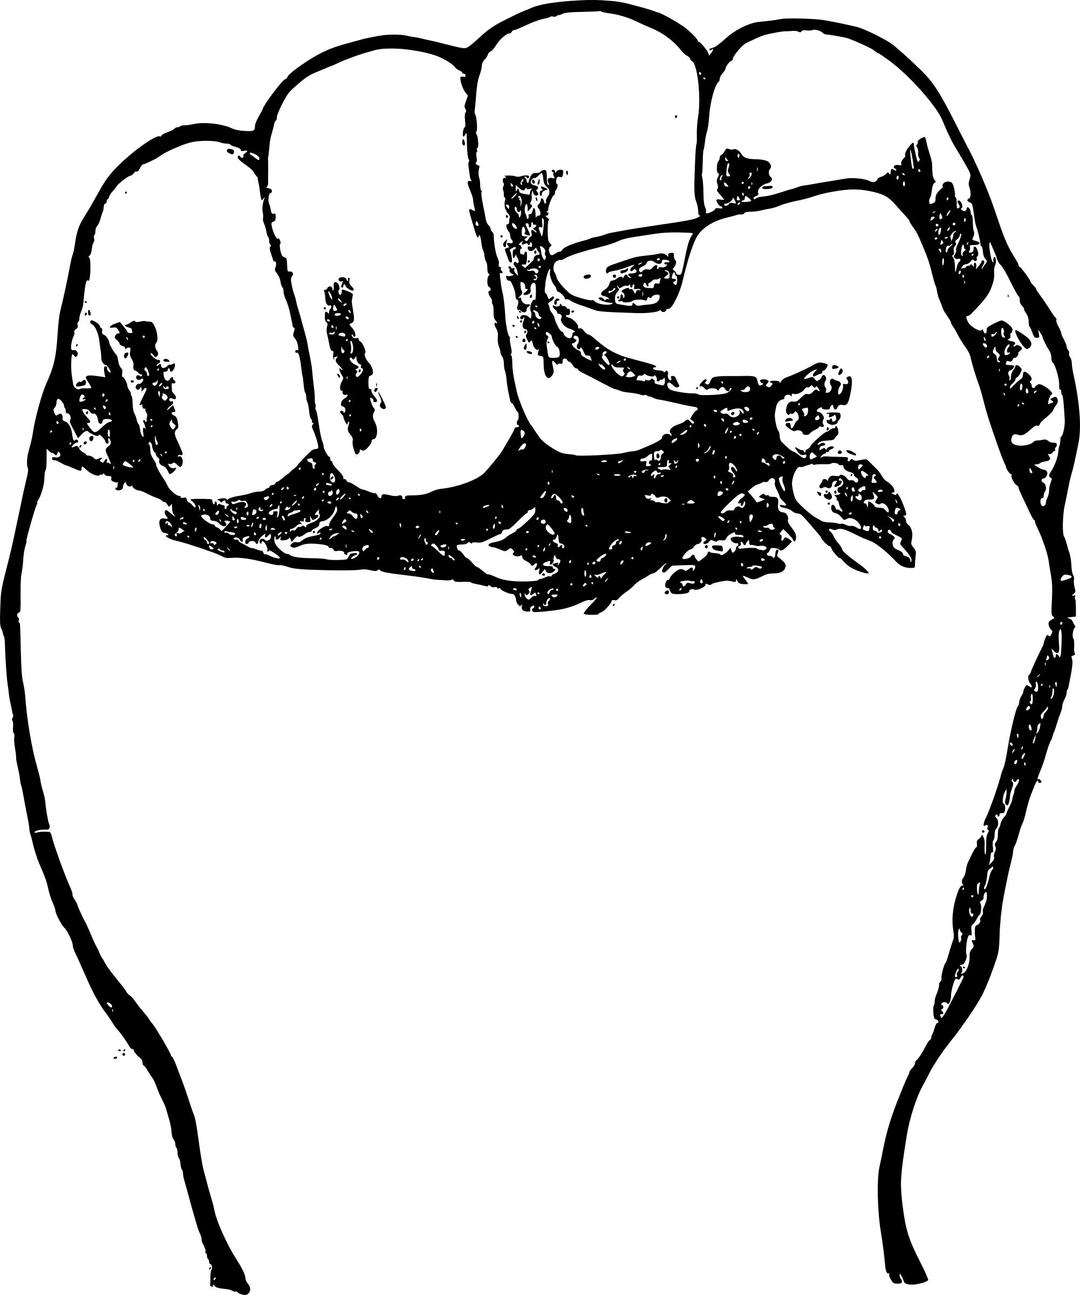 Fist in the Air png transparent